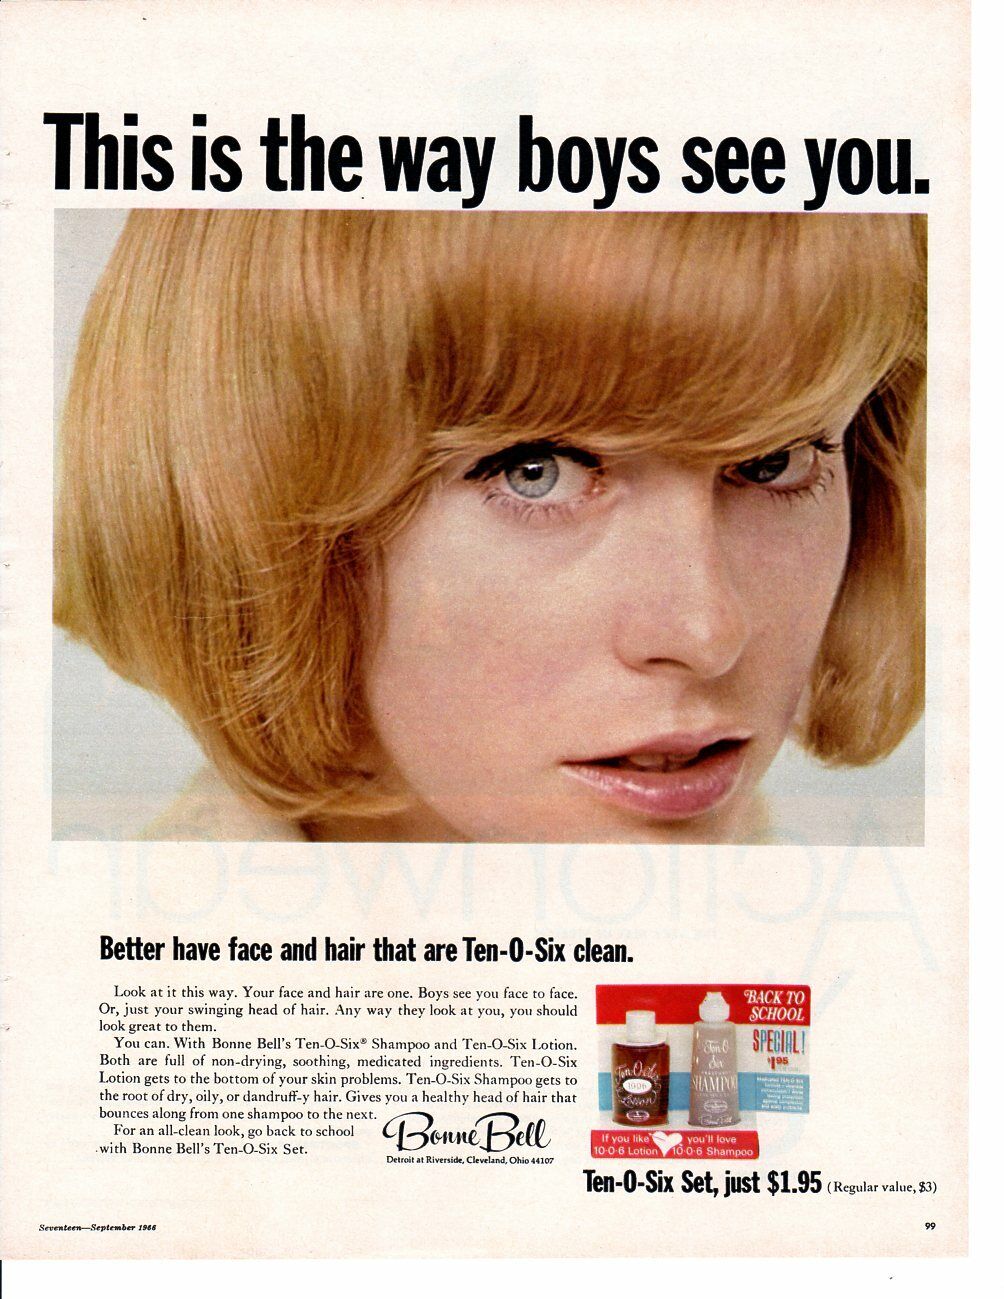 Vintage Beauty Fashion ad 1966 Bonne Bell shampoo This is the Way boys see You